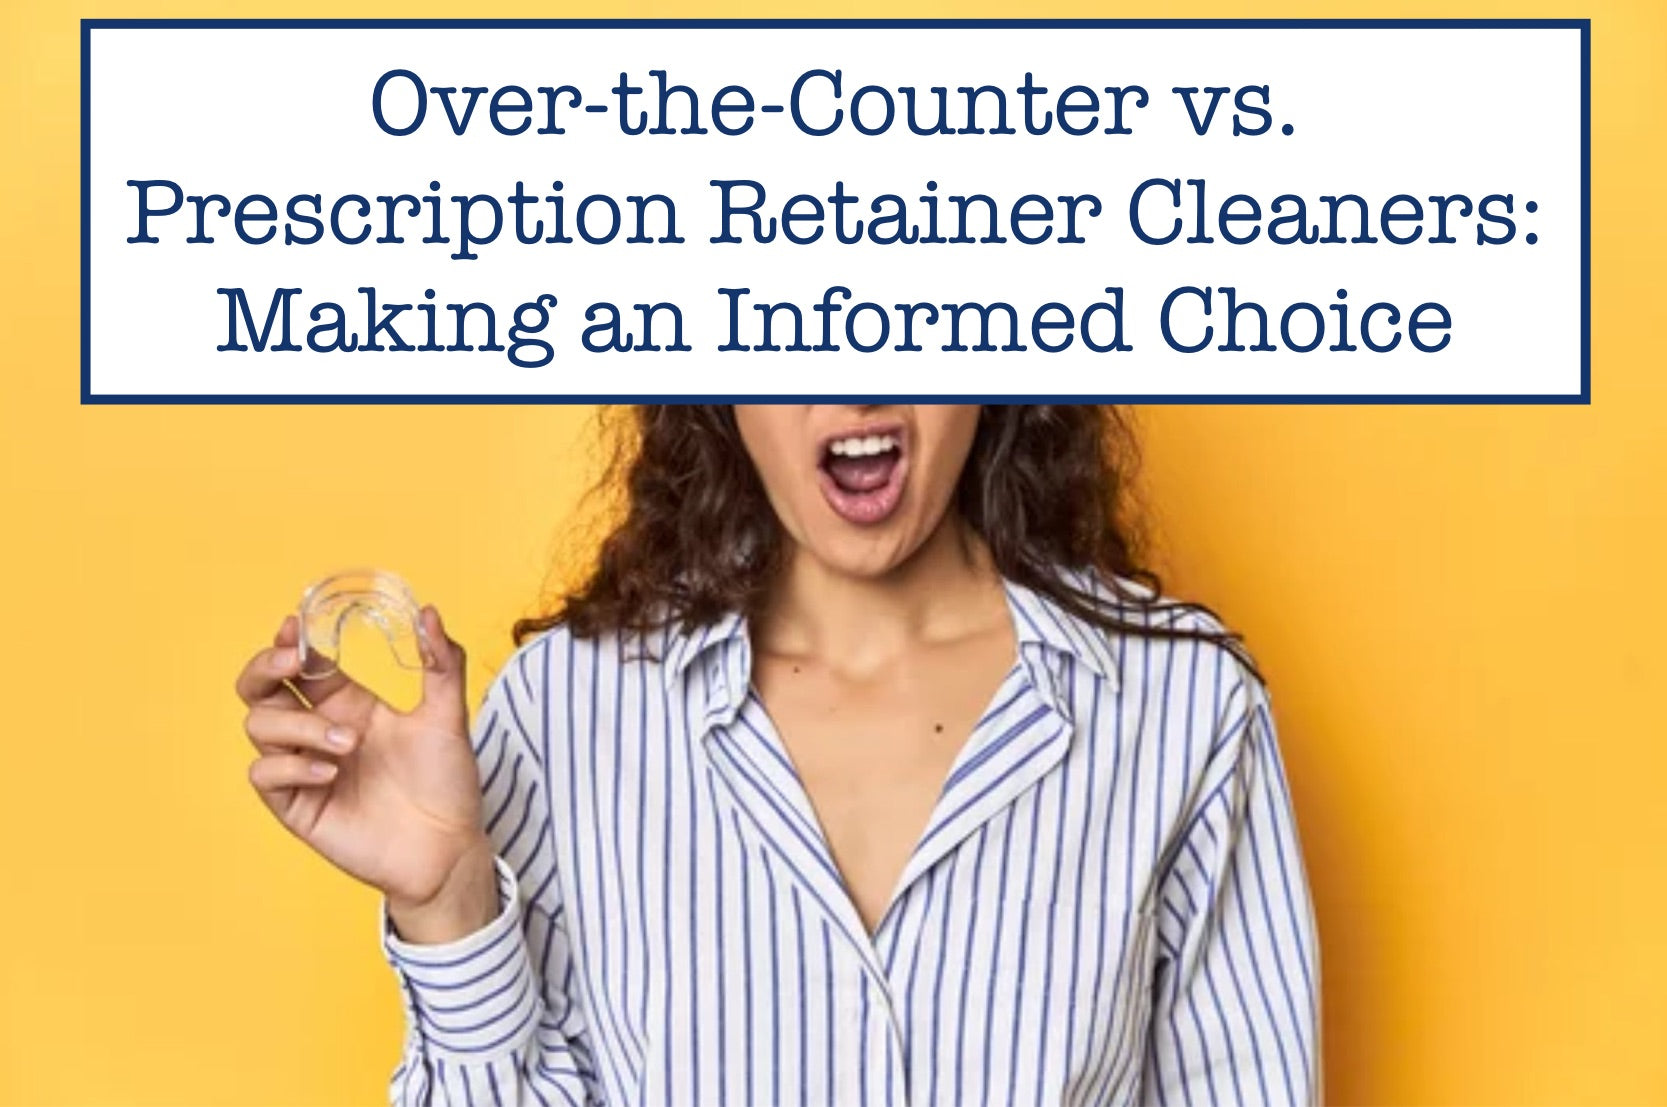 Over-the-Counter vs. Prescription Retainer Cleaners: Making an Informed Choice